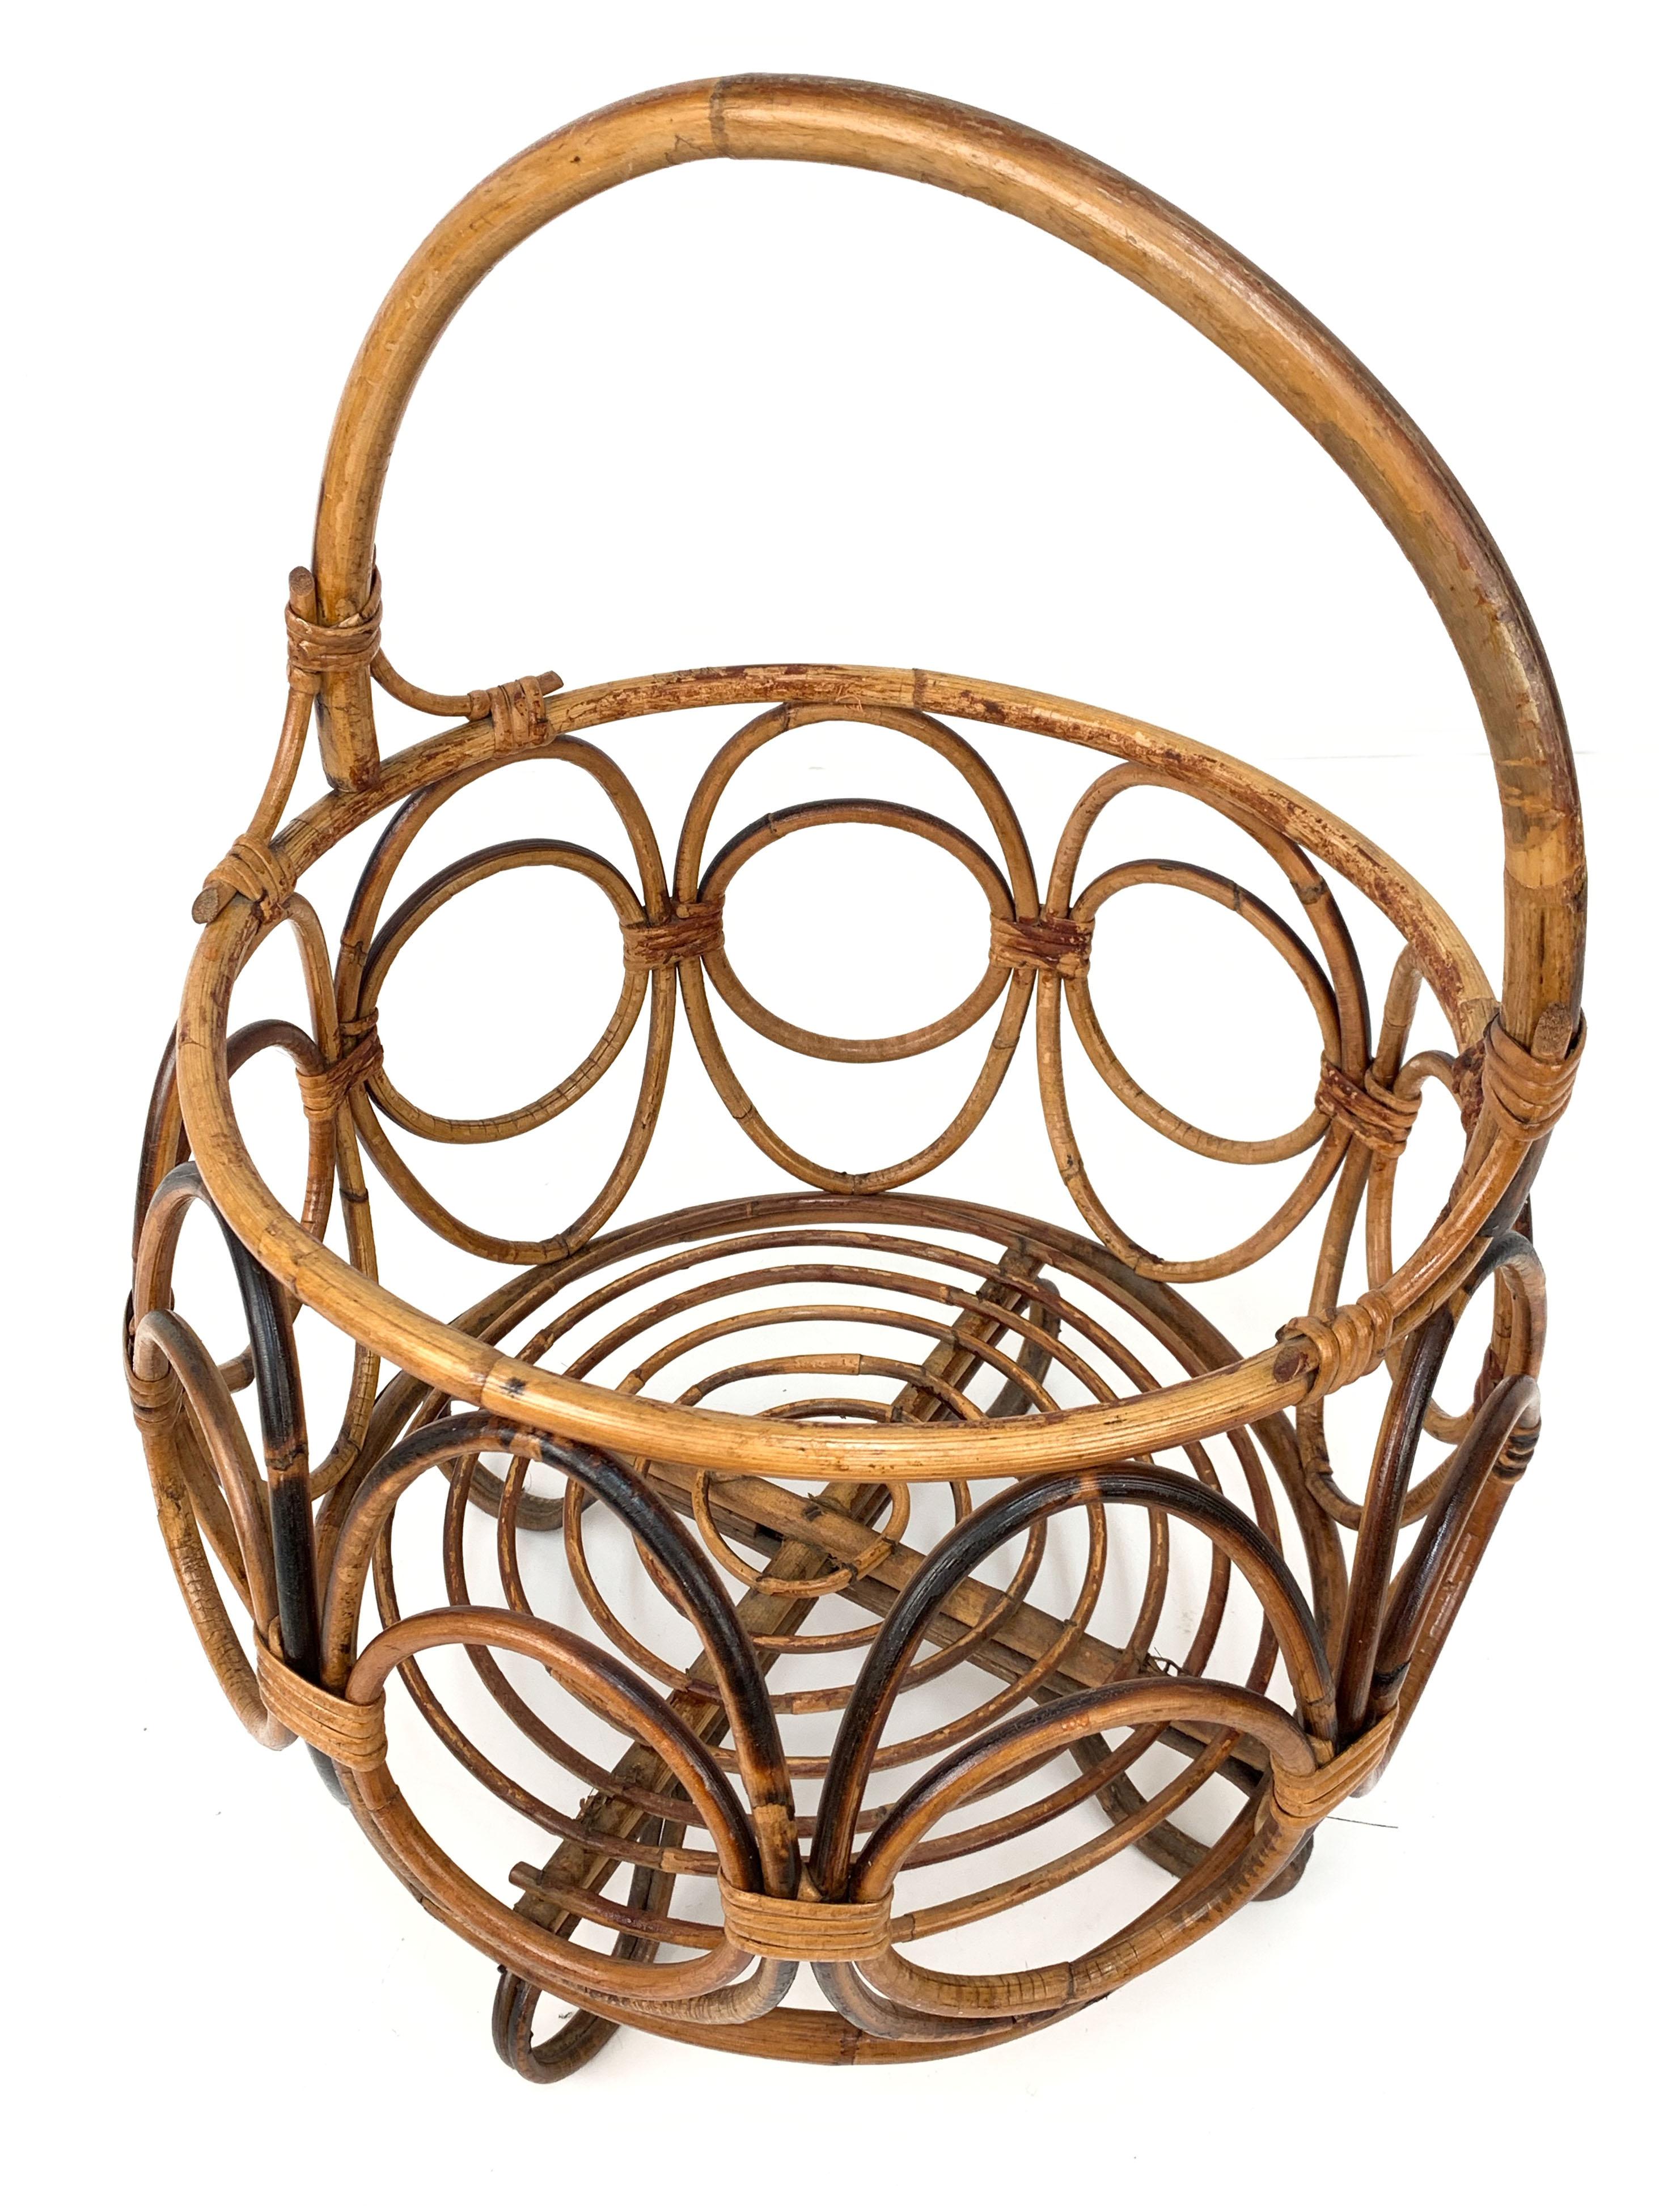 Midcentury French Riviera Bamboo and Rattan Italian Round Magazine Rack, 1960s For Sale 8